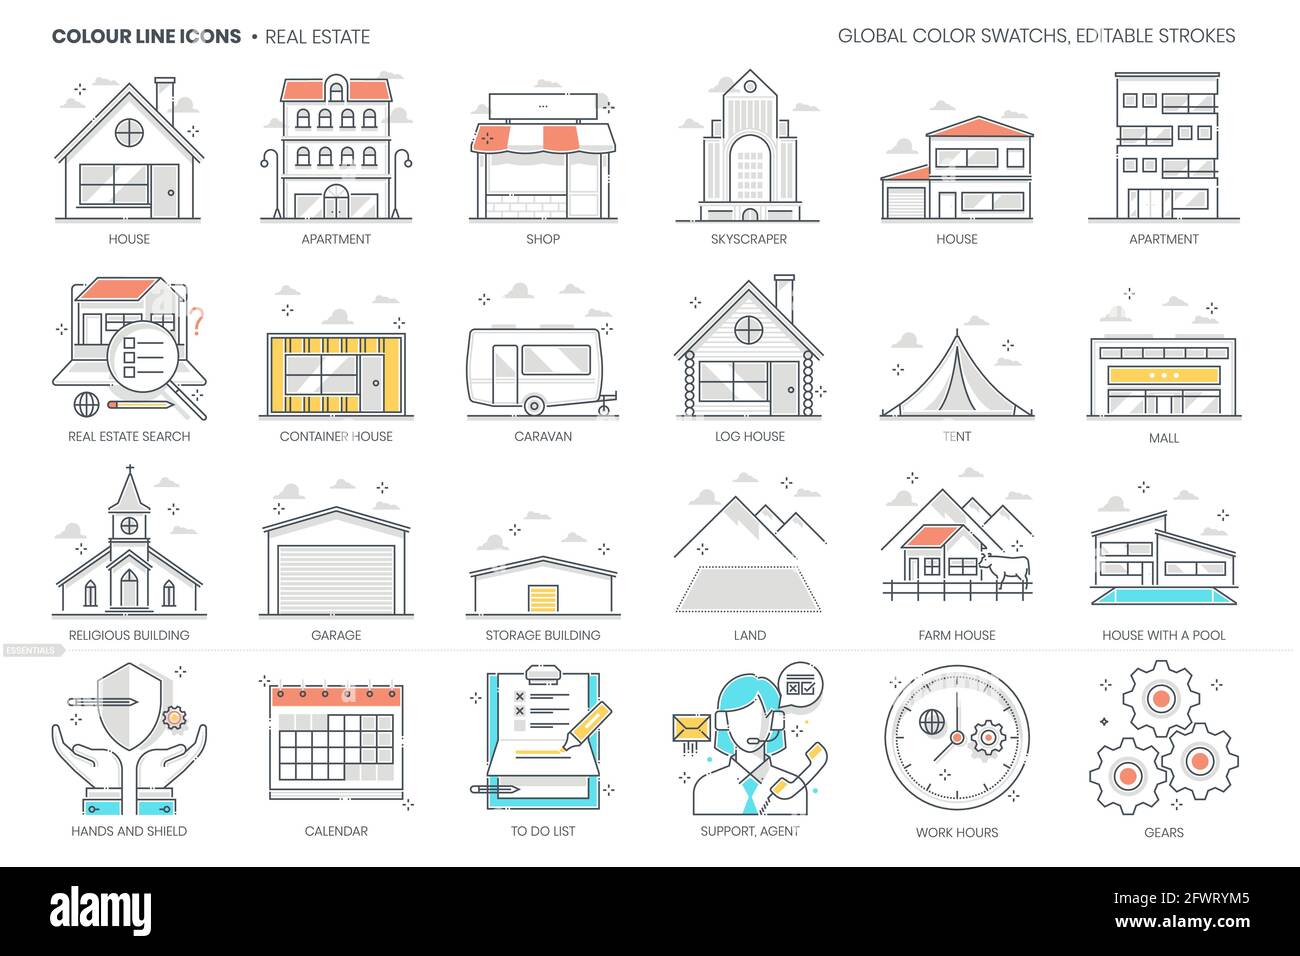 Real Estate related, color line, vector icon, illustration set Stock Vector